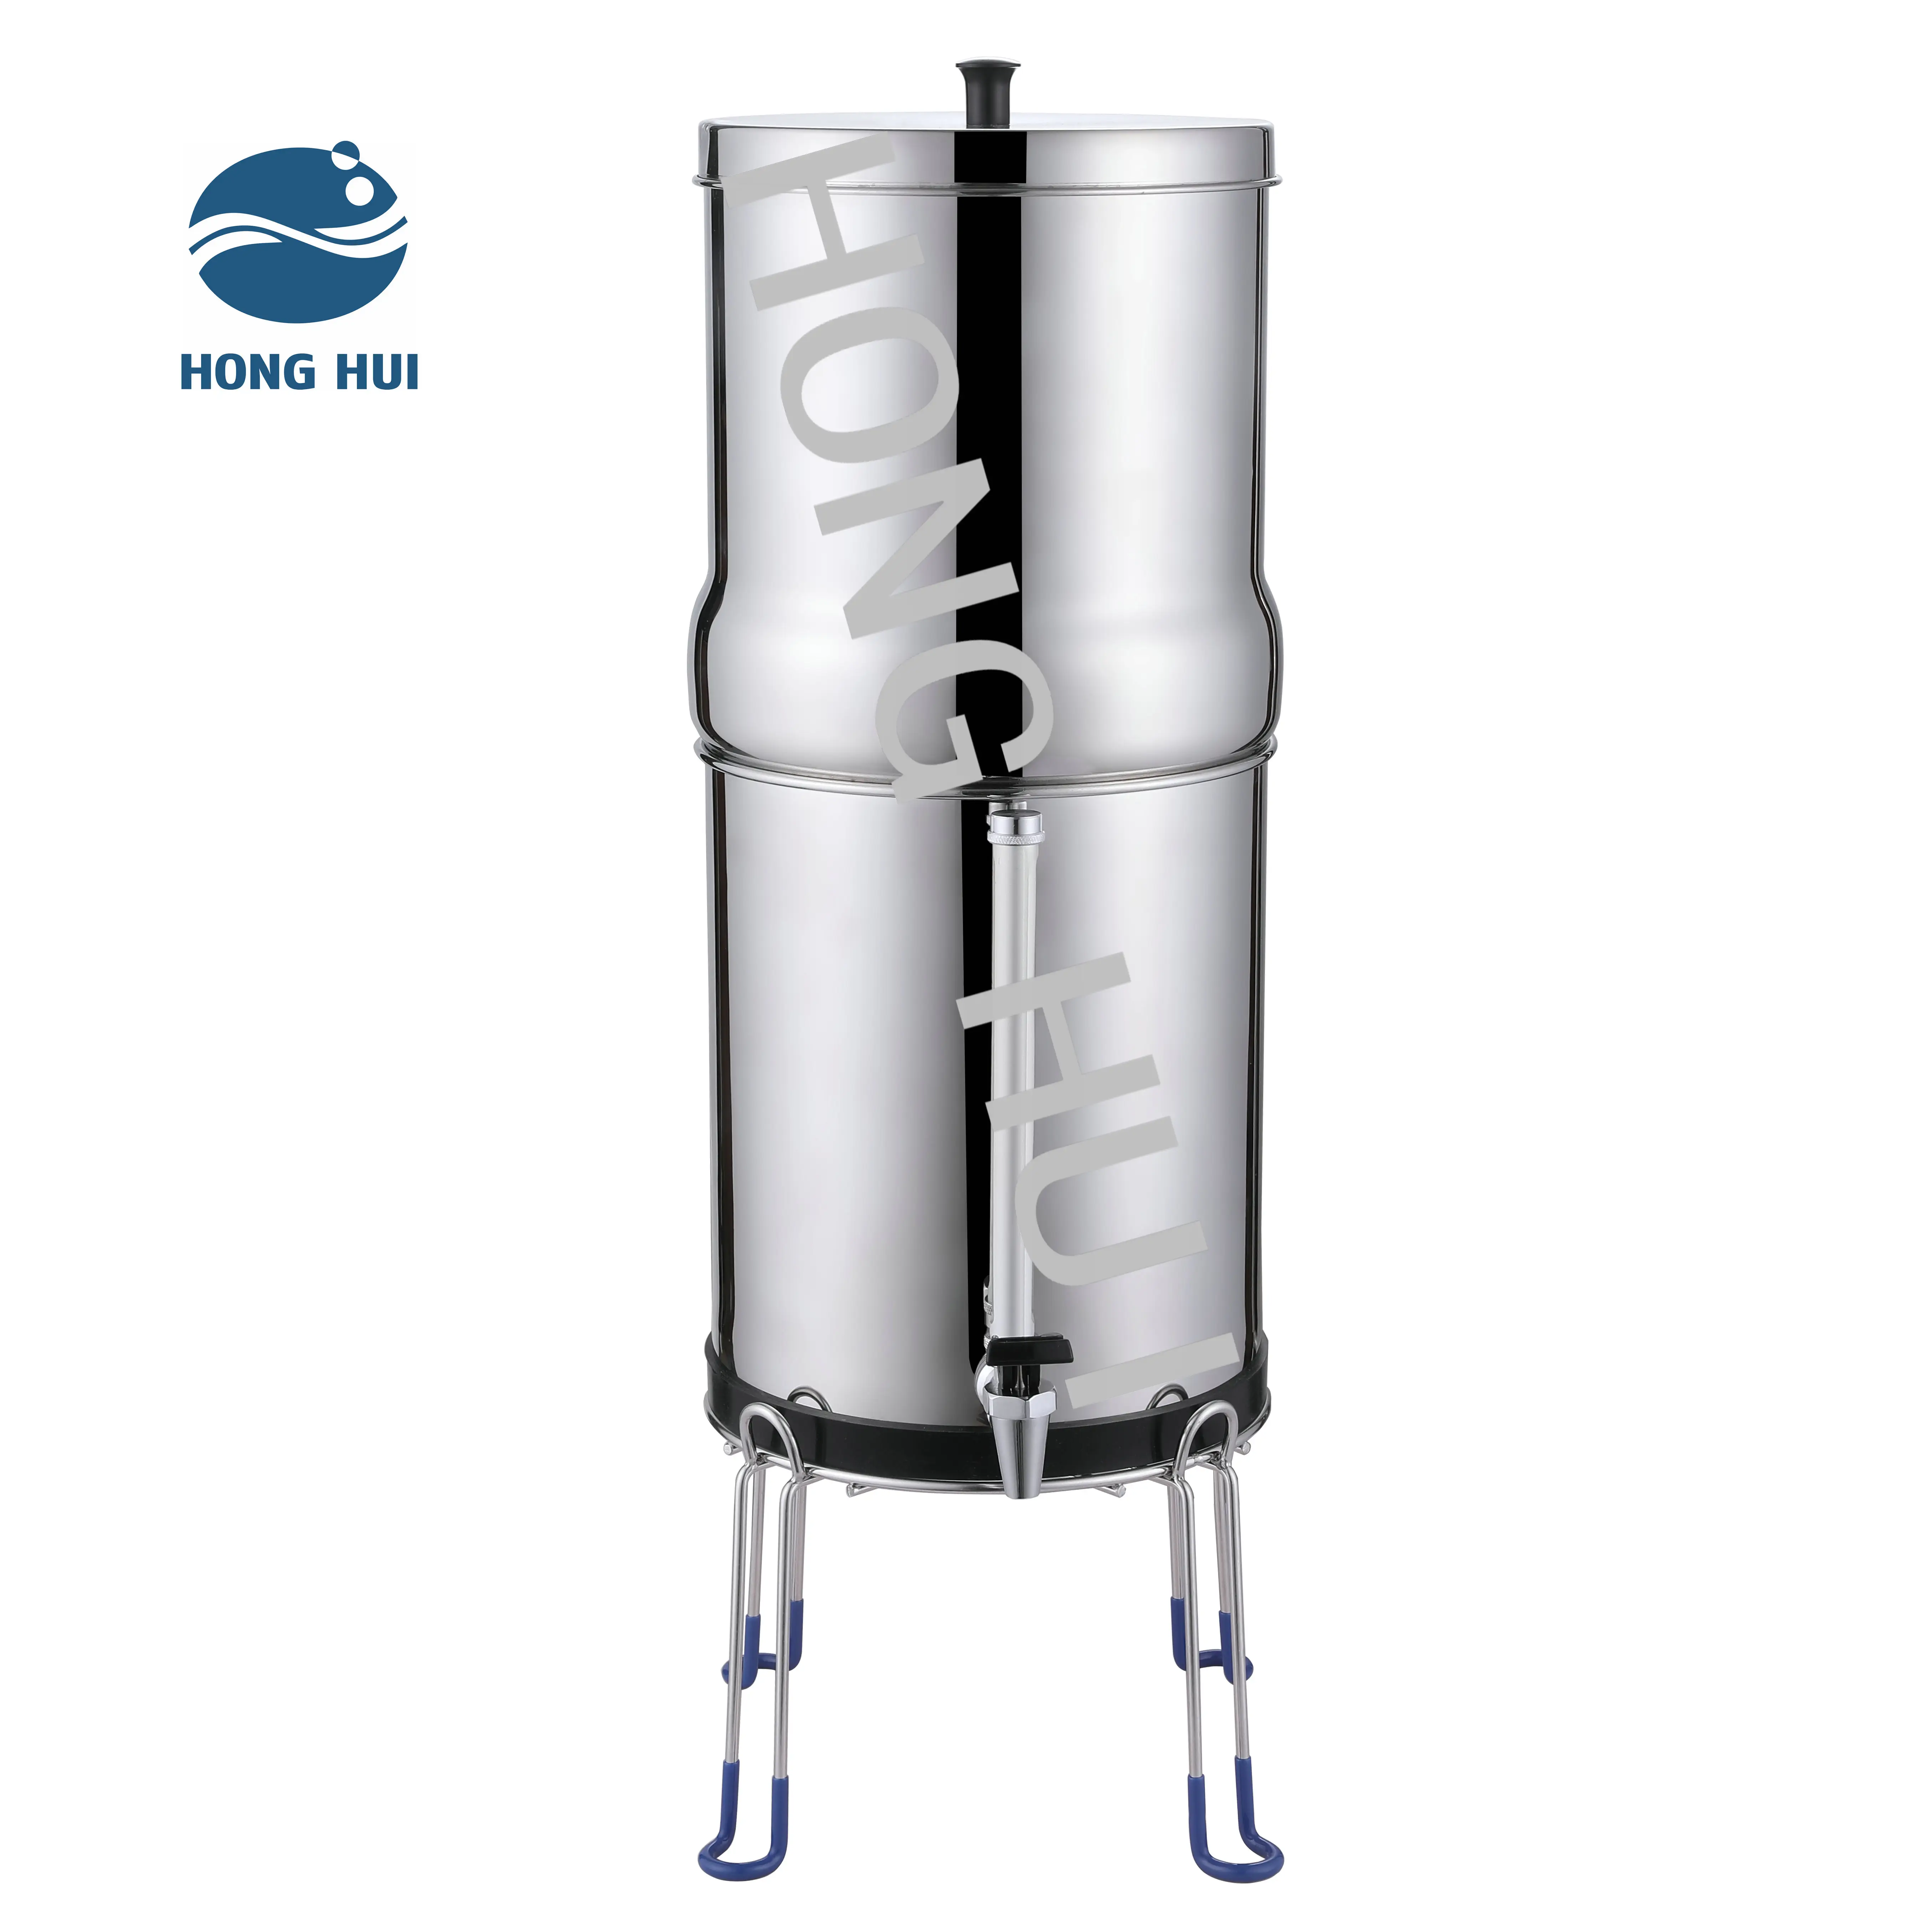 LT-1.5A stainless steel water purification camping gravity water filter system Gravity Fed Filter